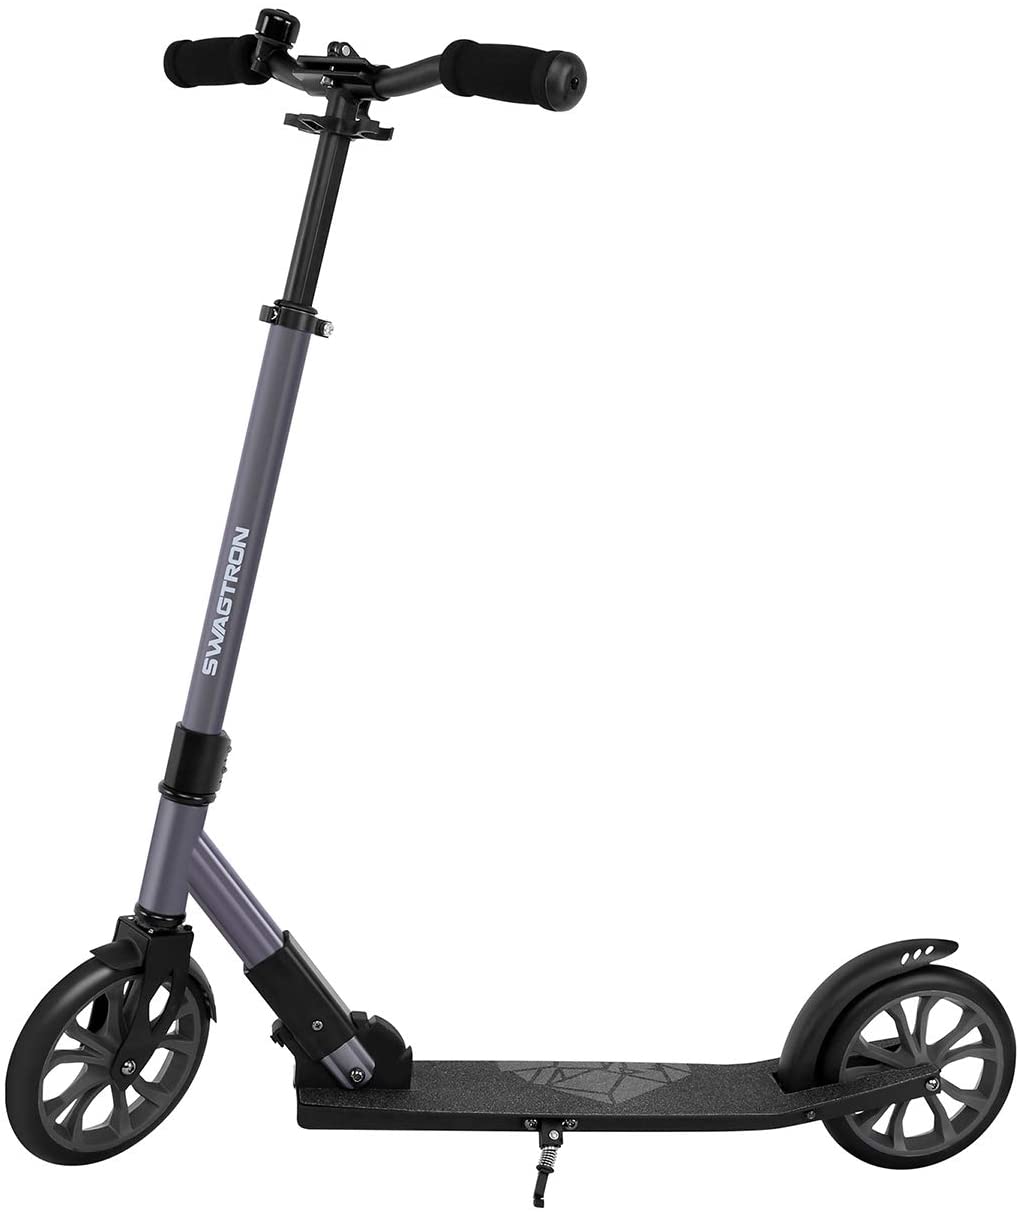 Swagtron Swagger 8 Folding Electric Scooter